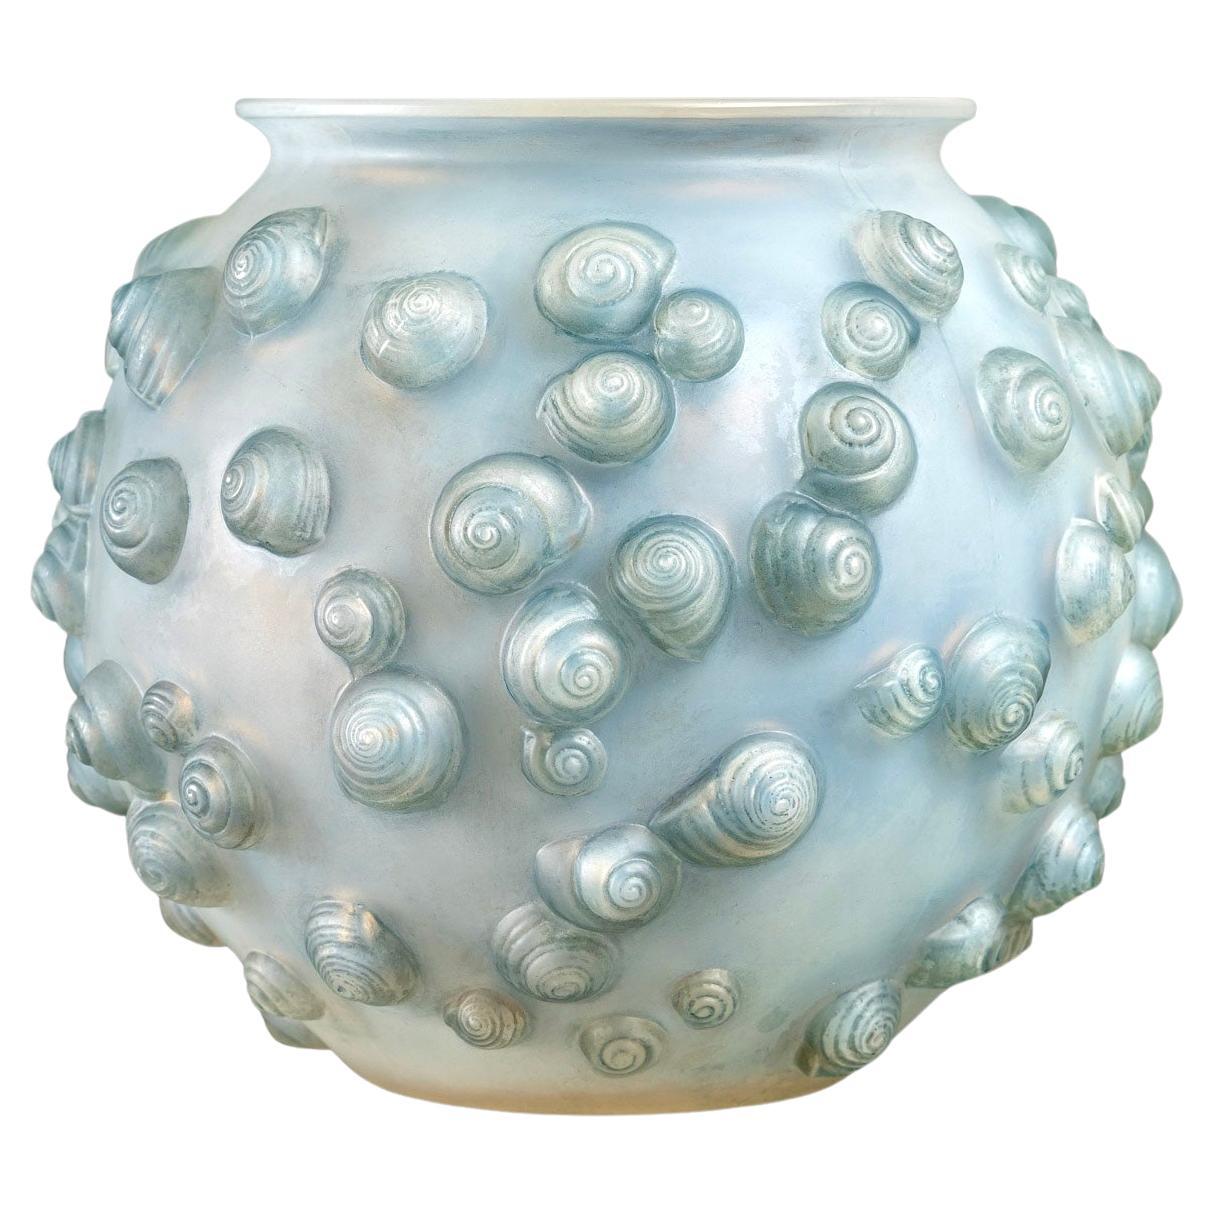 1926 René Lalique - Vase Palissy Double Cased Opalescent Glass with Blue Patina